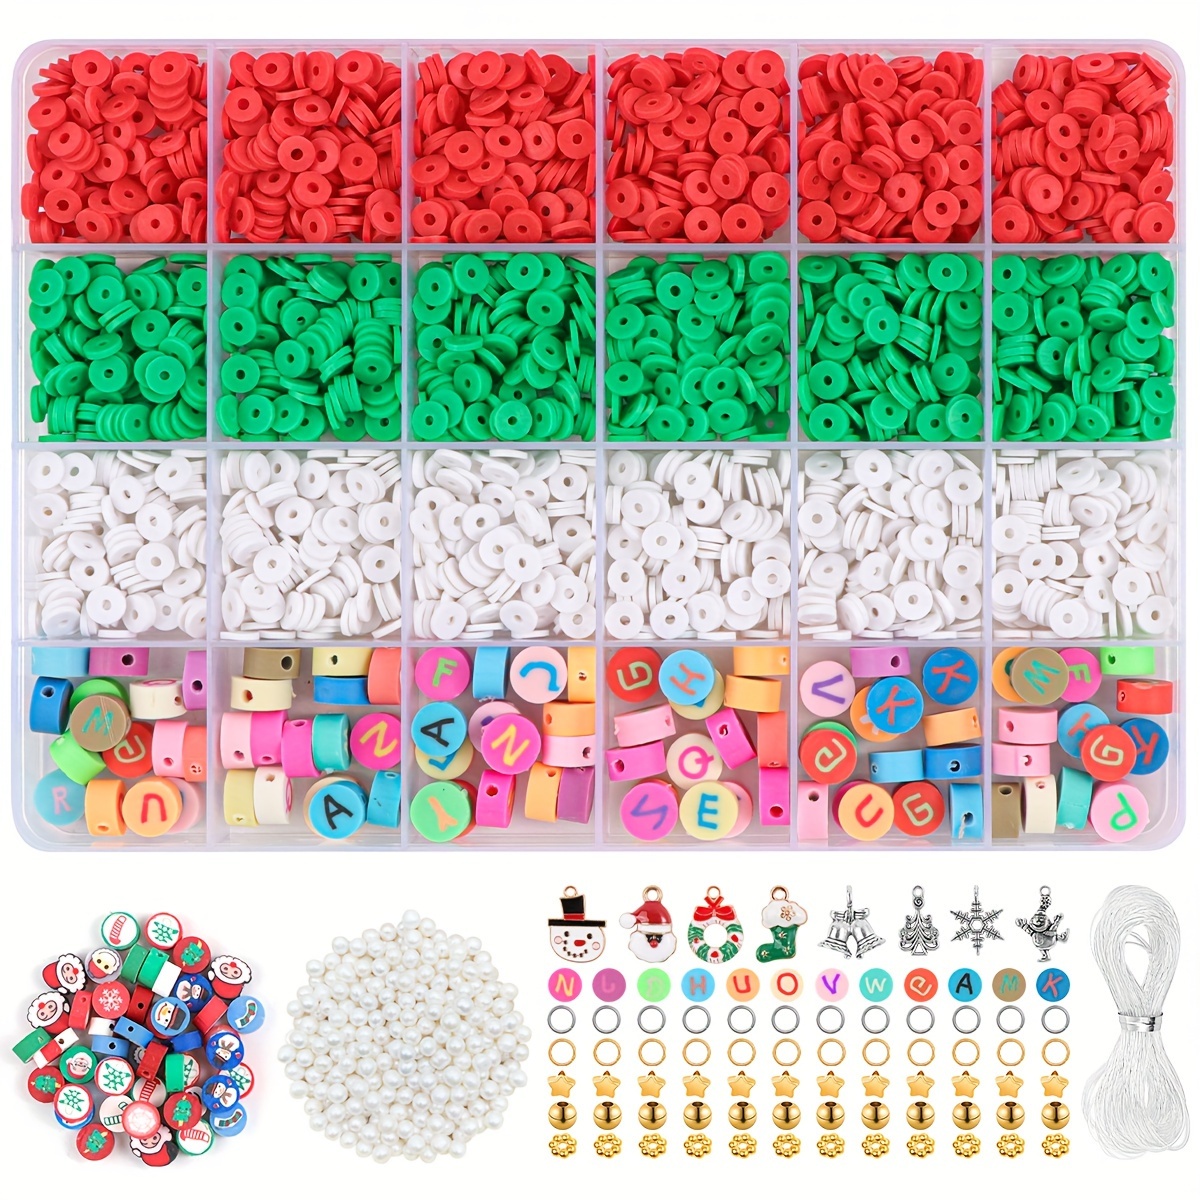 Polymer Clay Beads Bracelet Making Kit With Alloy Christmas-Themed Pendant,  Suitable For Diy Bracelet, Christmas Crafts, Ideal Xmas Gift For Kids